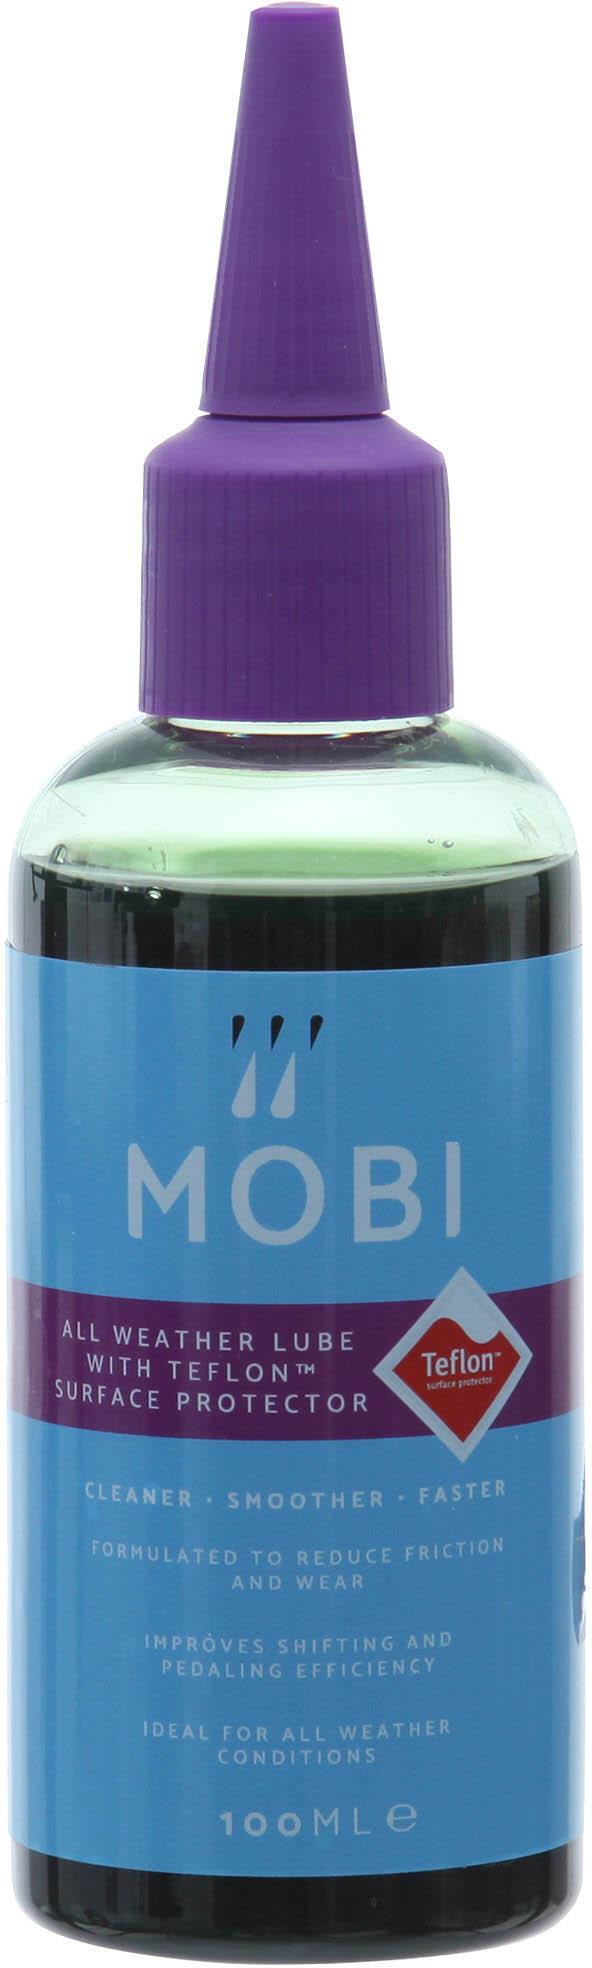 Mobi All Weather Lube With Teflon 100ml - Neutral